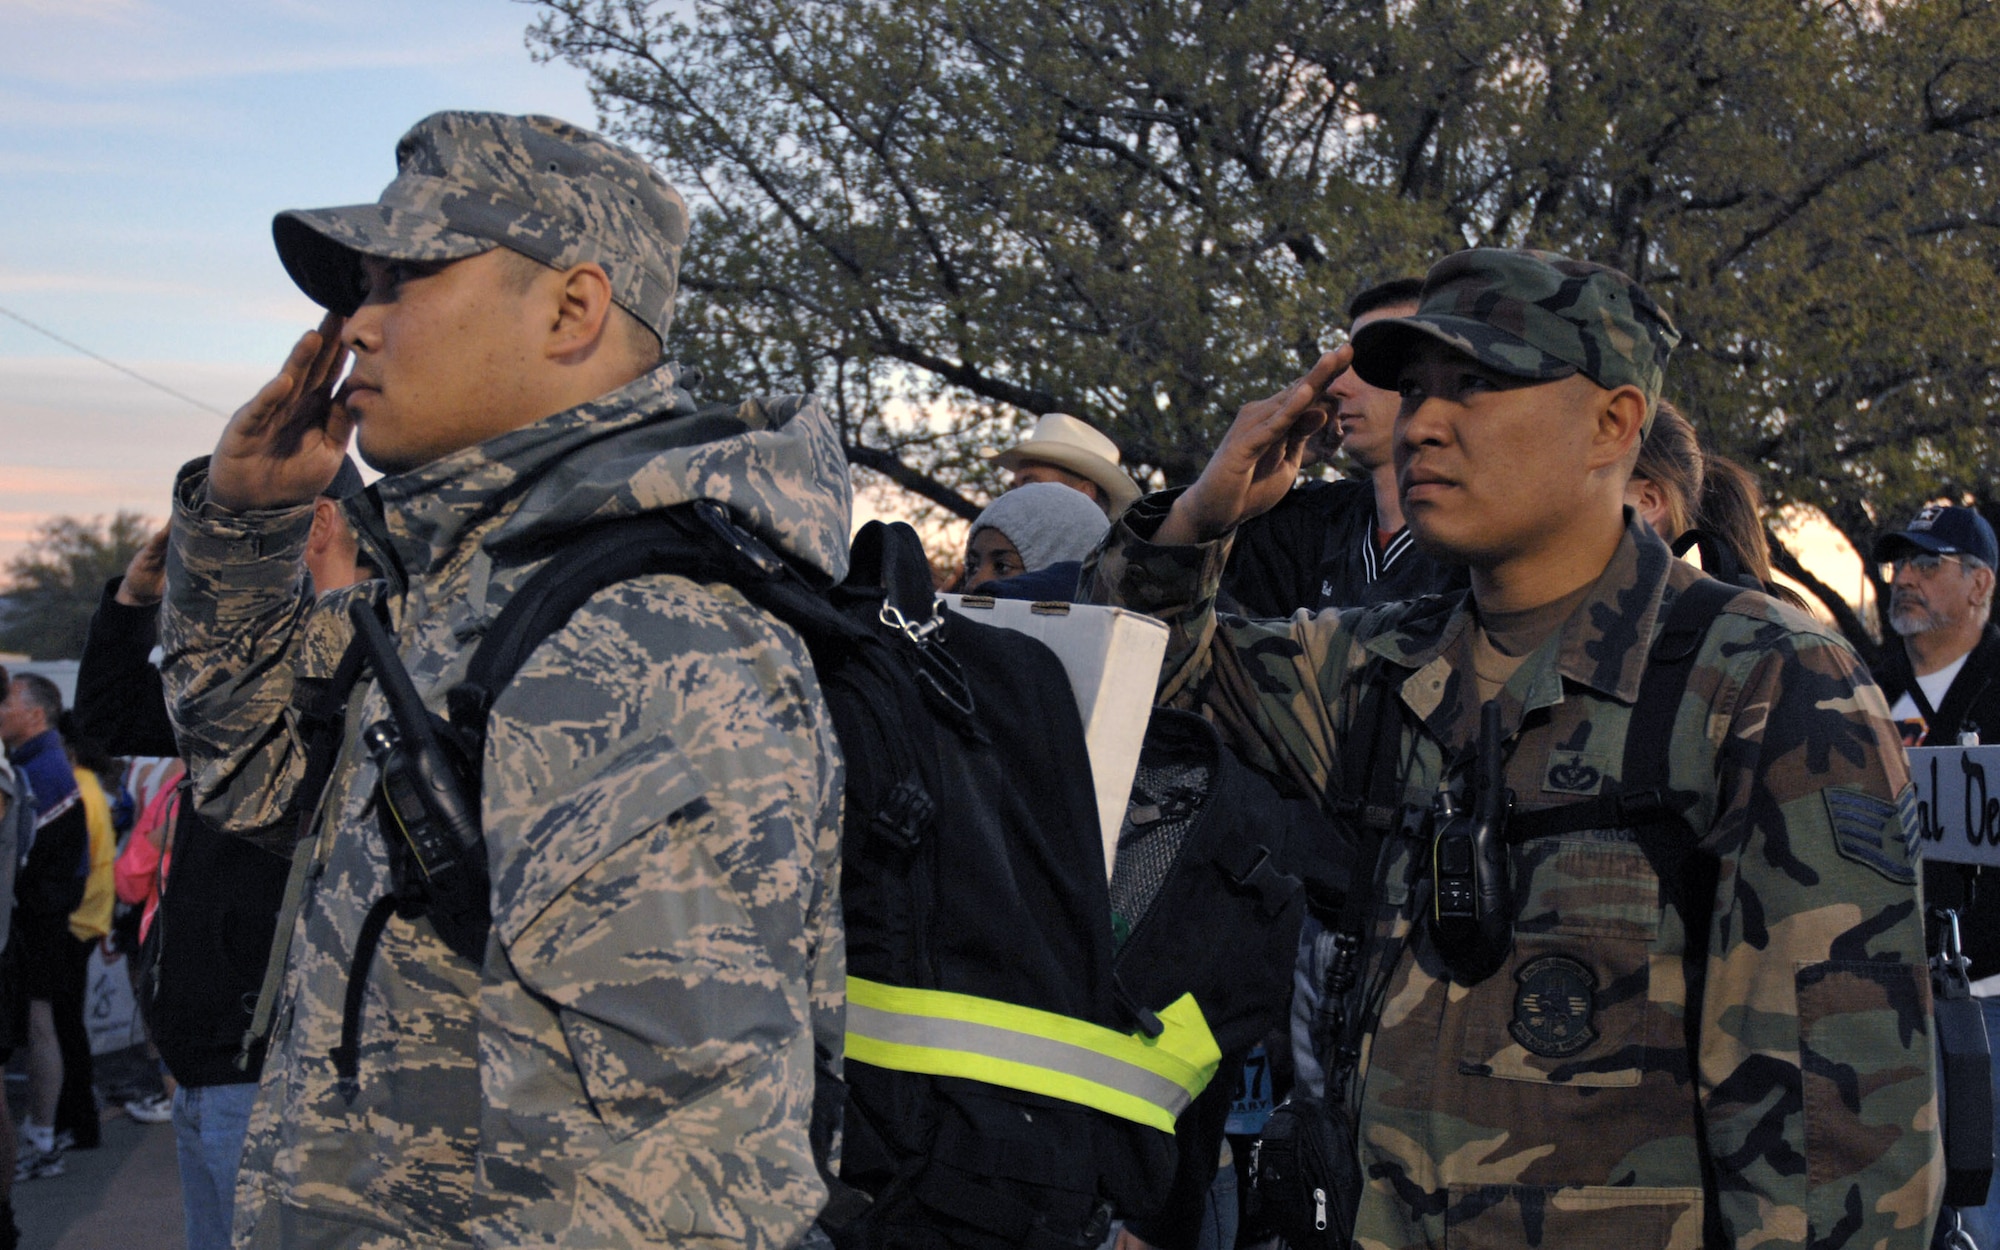 Staff Sgts. Angelito Cooper (left) and Rhallete Javier salute the flag during opening ceremonies of the 19th Annual Bataan Memorial Death March March 30 at White Sands Missile Range, N.M. More than 4,400 runners and marchers participated in the 26.2 or 15-mile run/walk on March 30. Sergeant Cooper is assigned to the 27th Special Operations Logistics Readiness Squadron, and Sergeant Javier is from the 27th Special Operations Civil Engineer Squadron, both from Cannon Air Force Base, N.M. (U.S. Air Force photo/Airman 1st Class Evelyn Chavez) 
